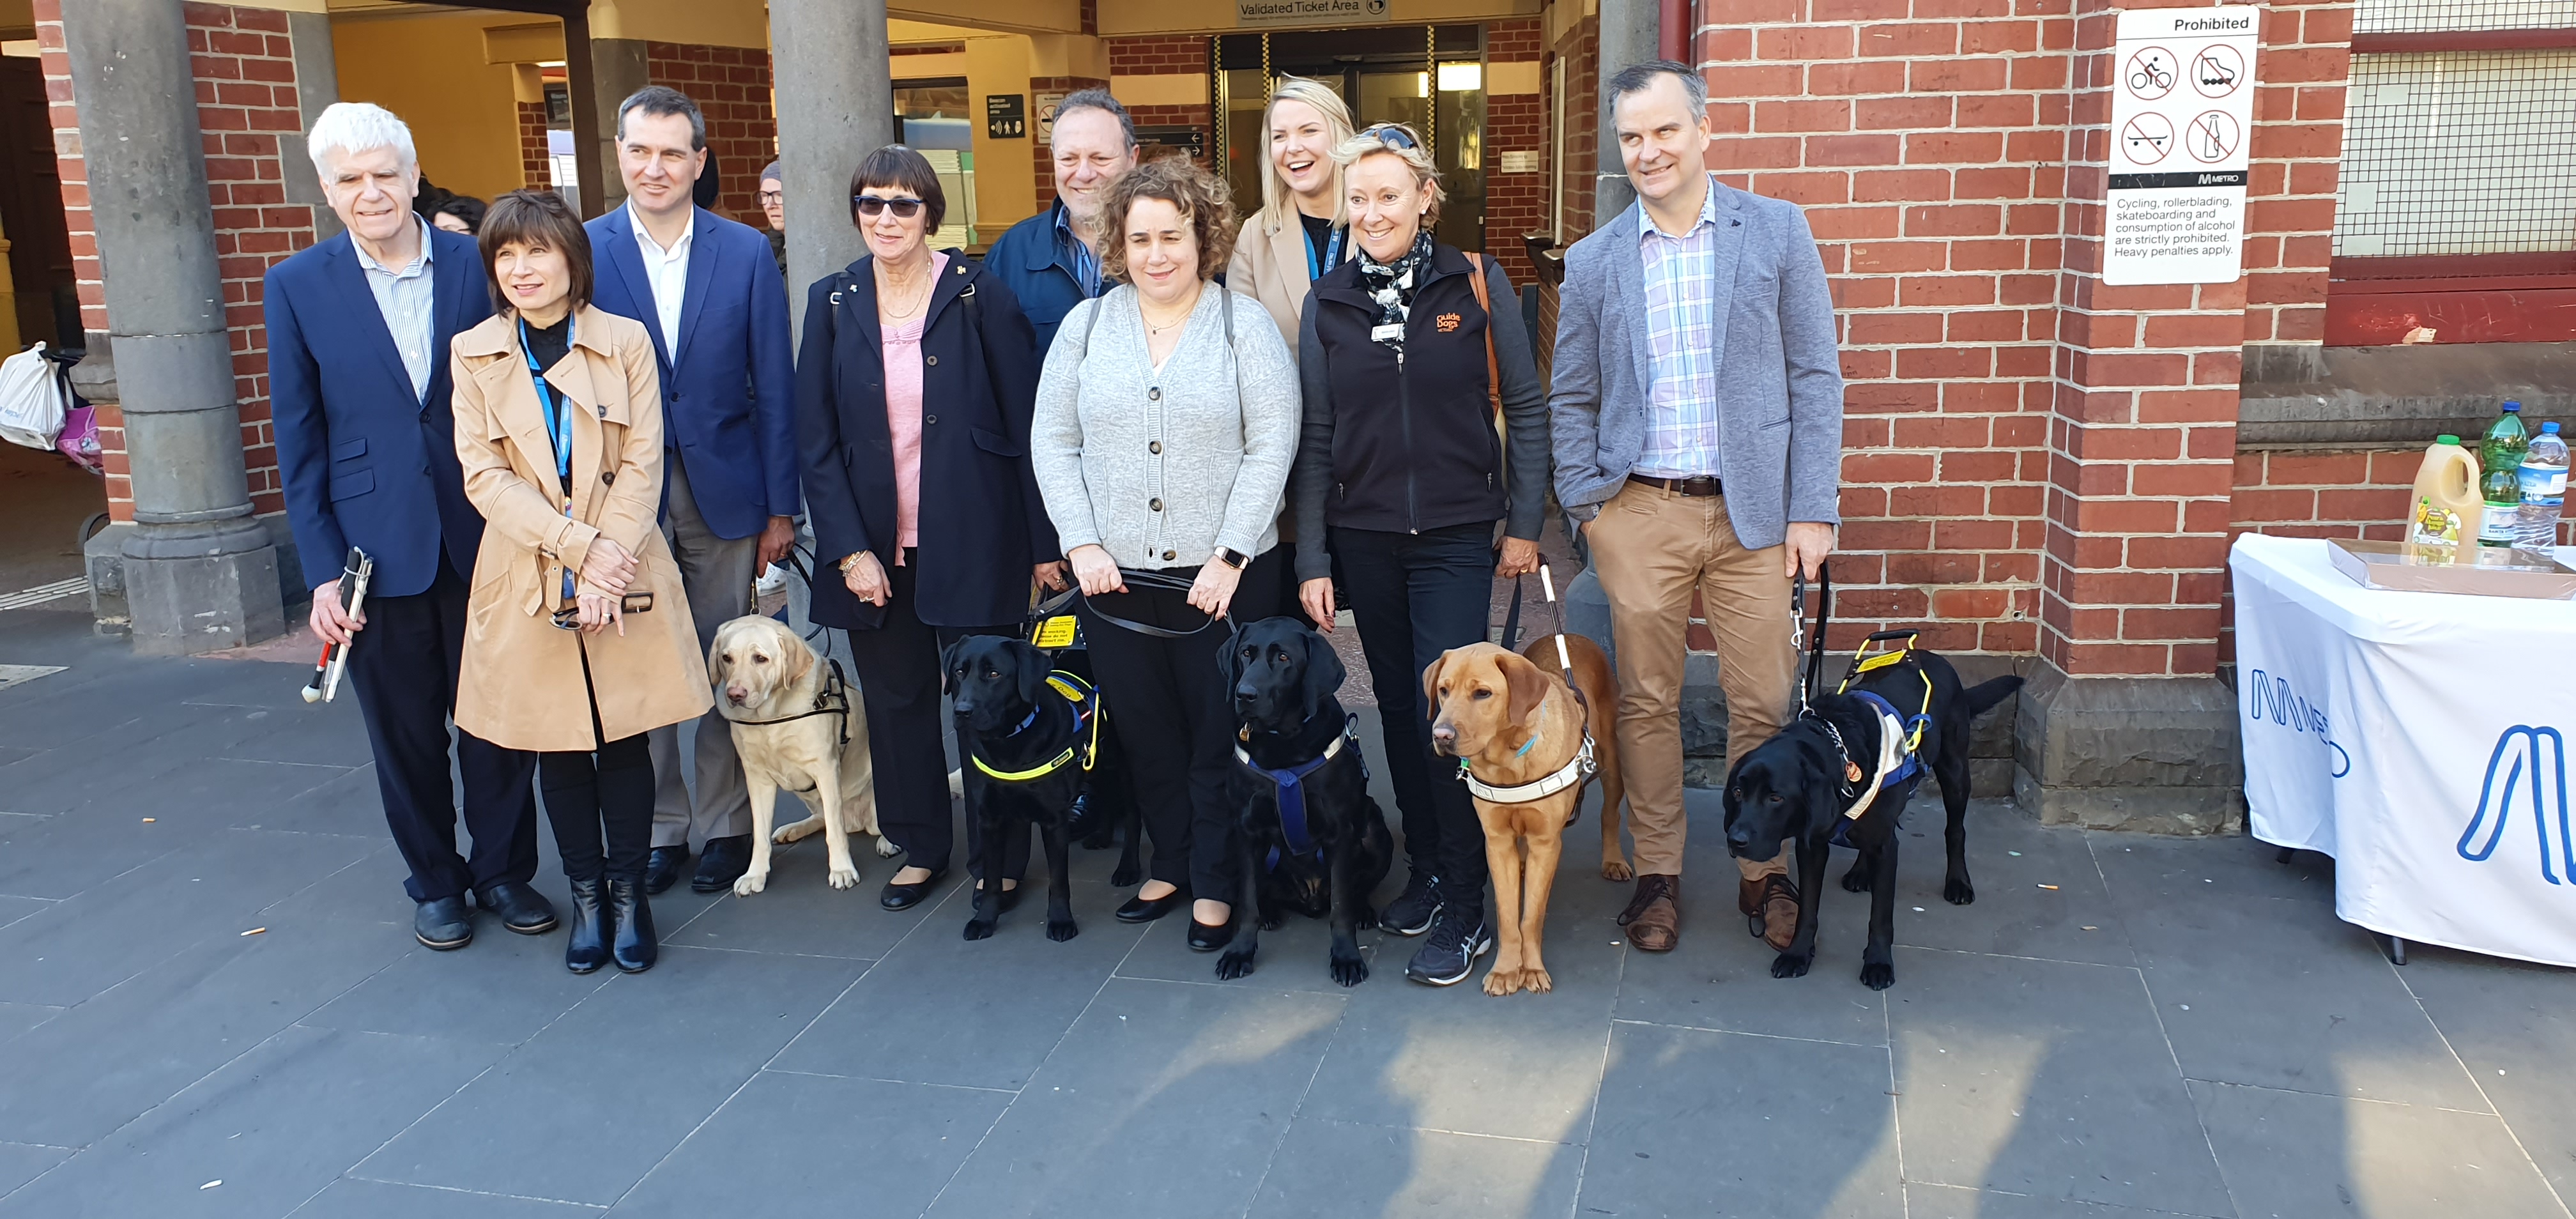 Metro Trains staff and clients from Vision Australia Seeing EYE Dogs and Guide Dogs Victoria stand at Footscray Station with their assistance dogs.